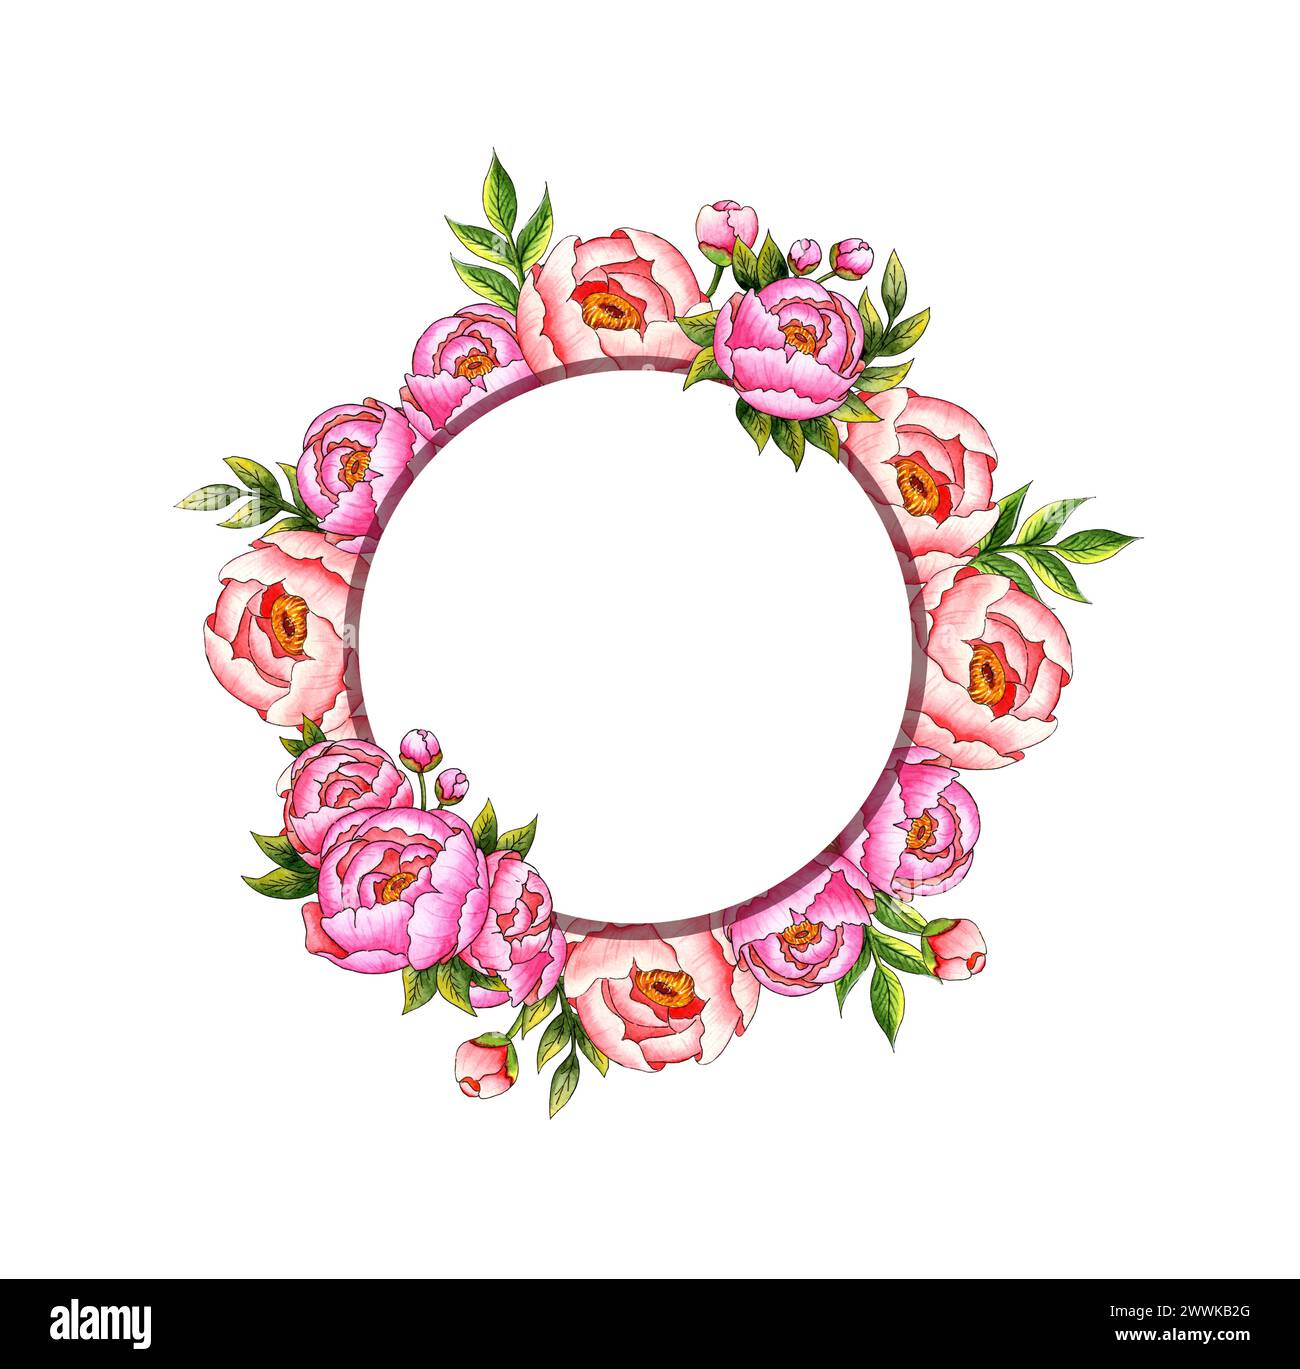 Watercolor illustration round frame wreath border with pink peonies, buds and leaves. Botanical composition isolated on a white background. Great patt Stock Photo